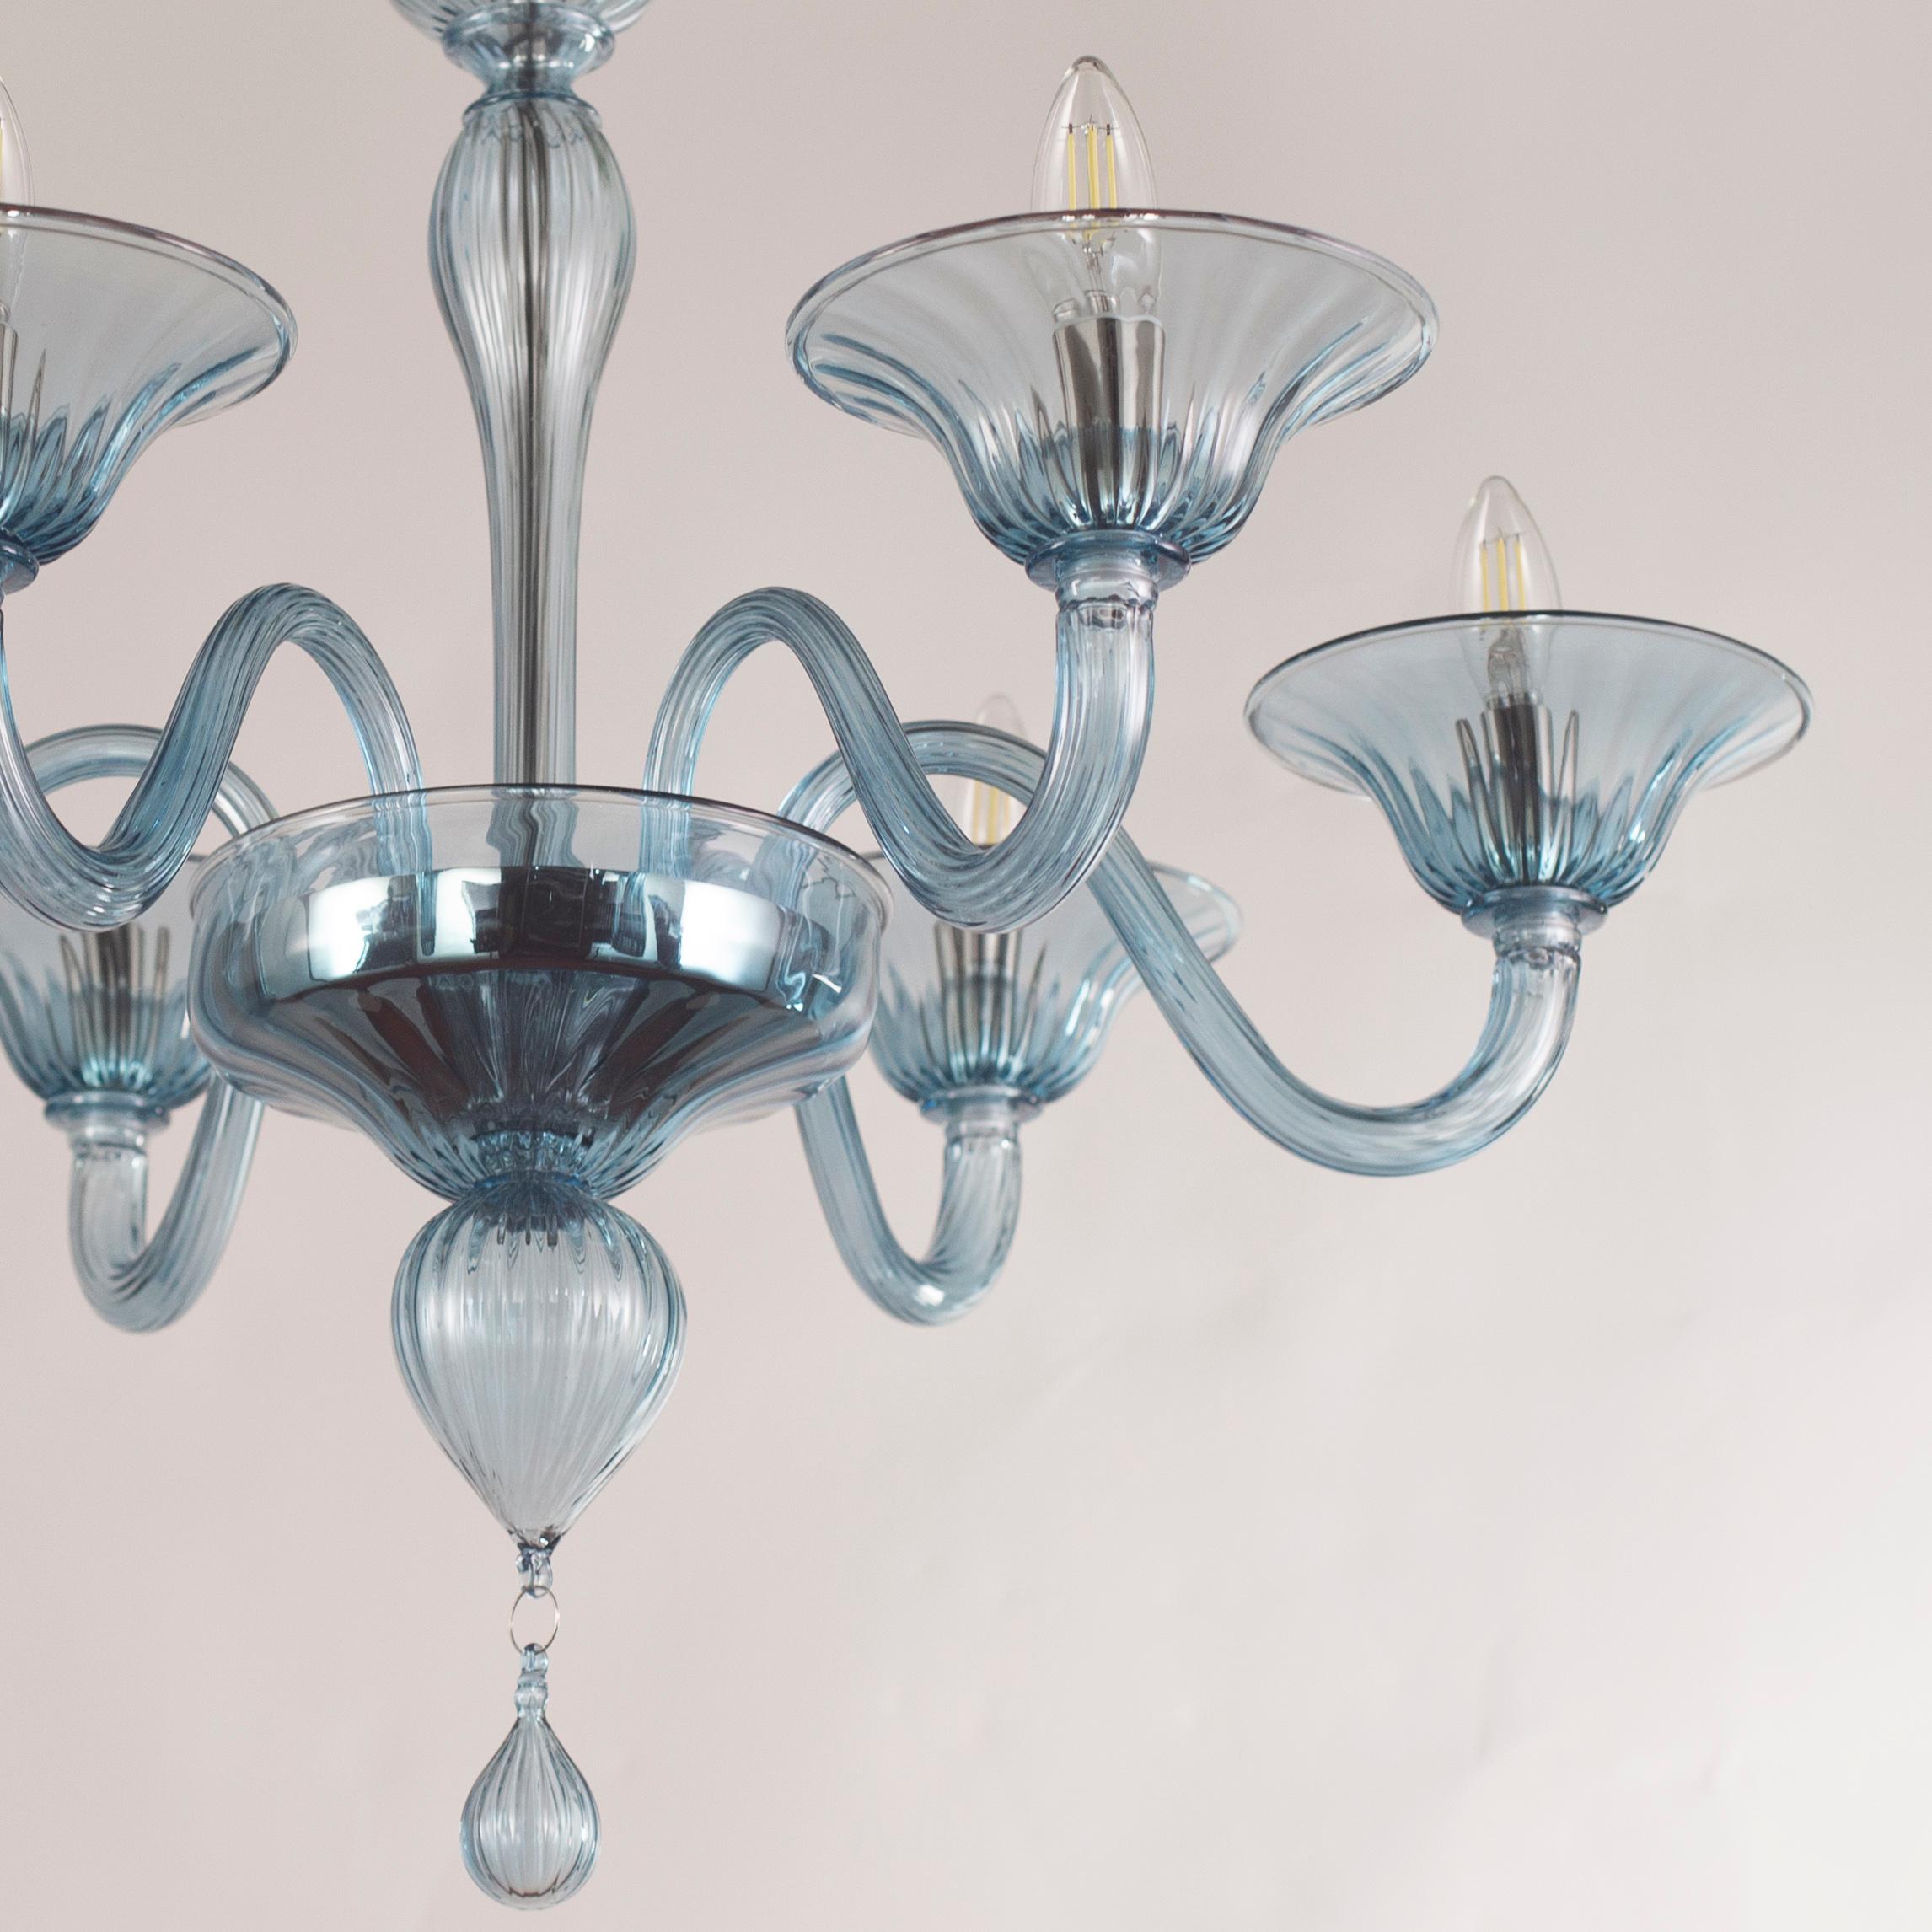 Simplicissimus 360 chandelier, 6 lights, Talco Blue artistic glass by Multiforme
This collection in Murano glass is characterized by superb simplicity. It is the result of a research which harks back to the Classic Murano chandeliers with the